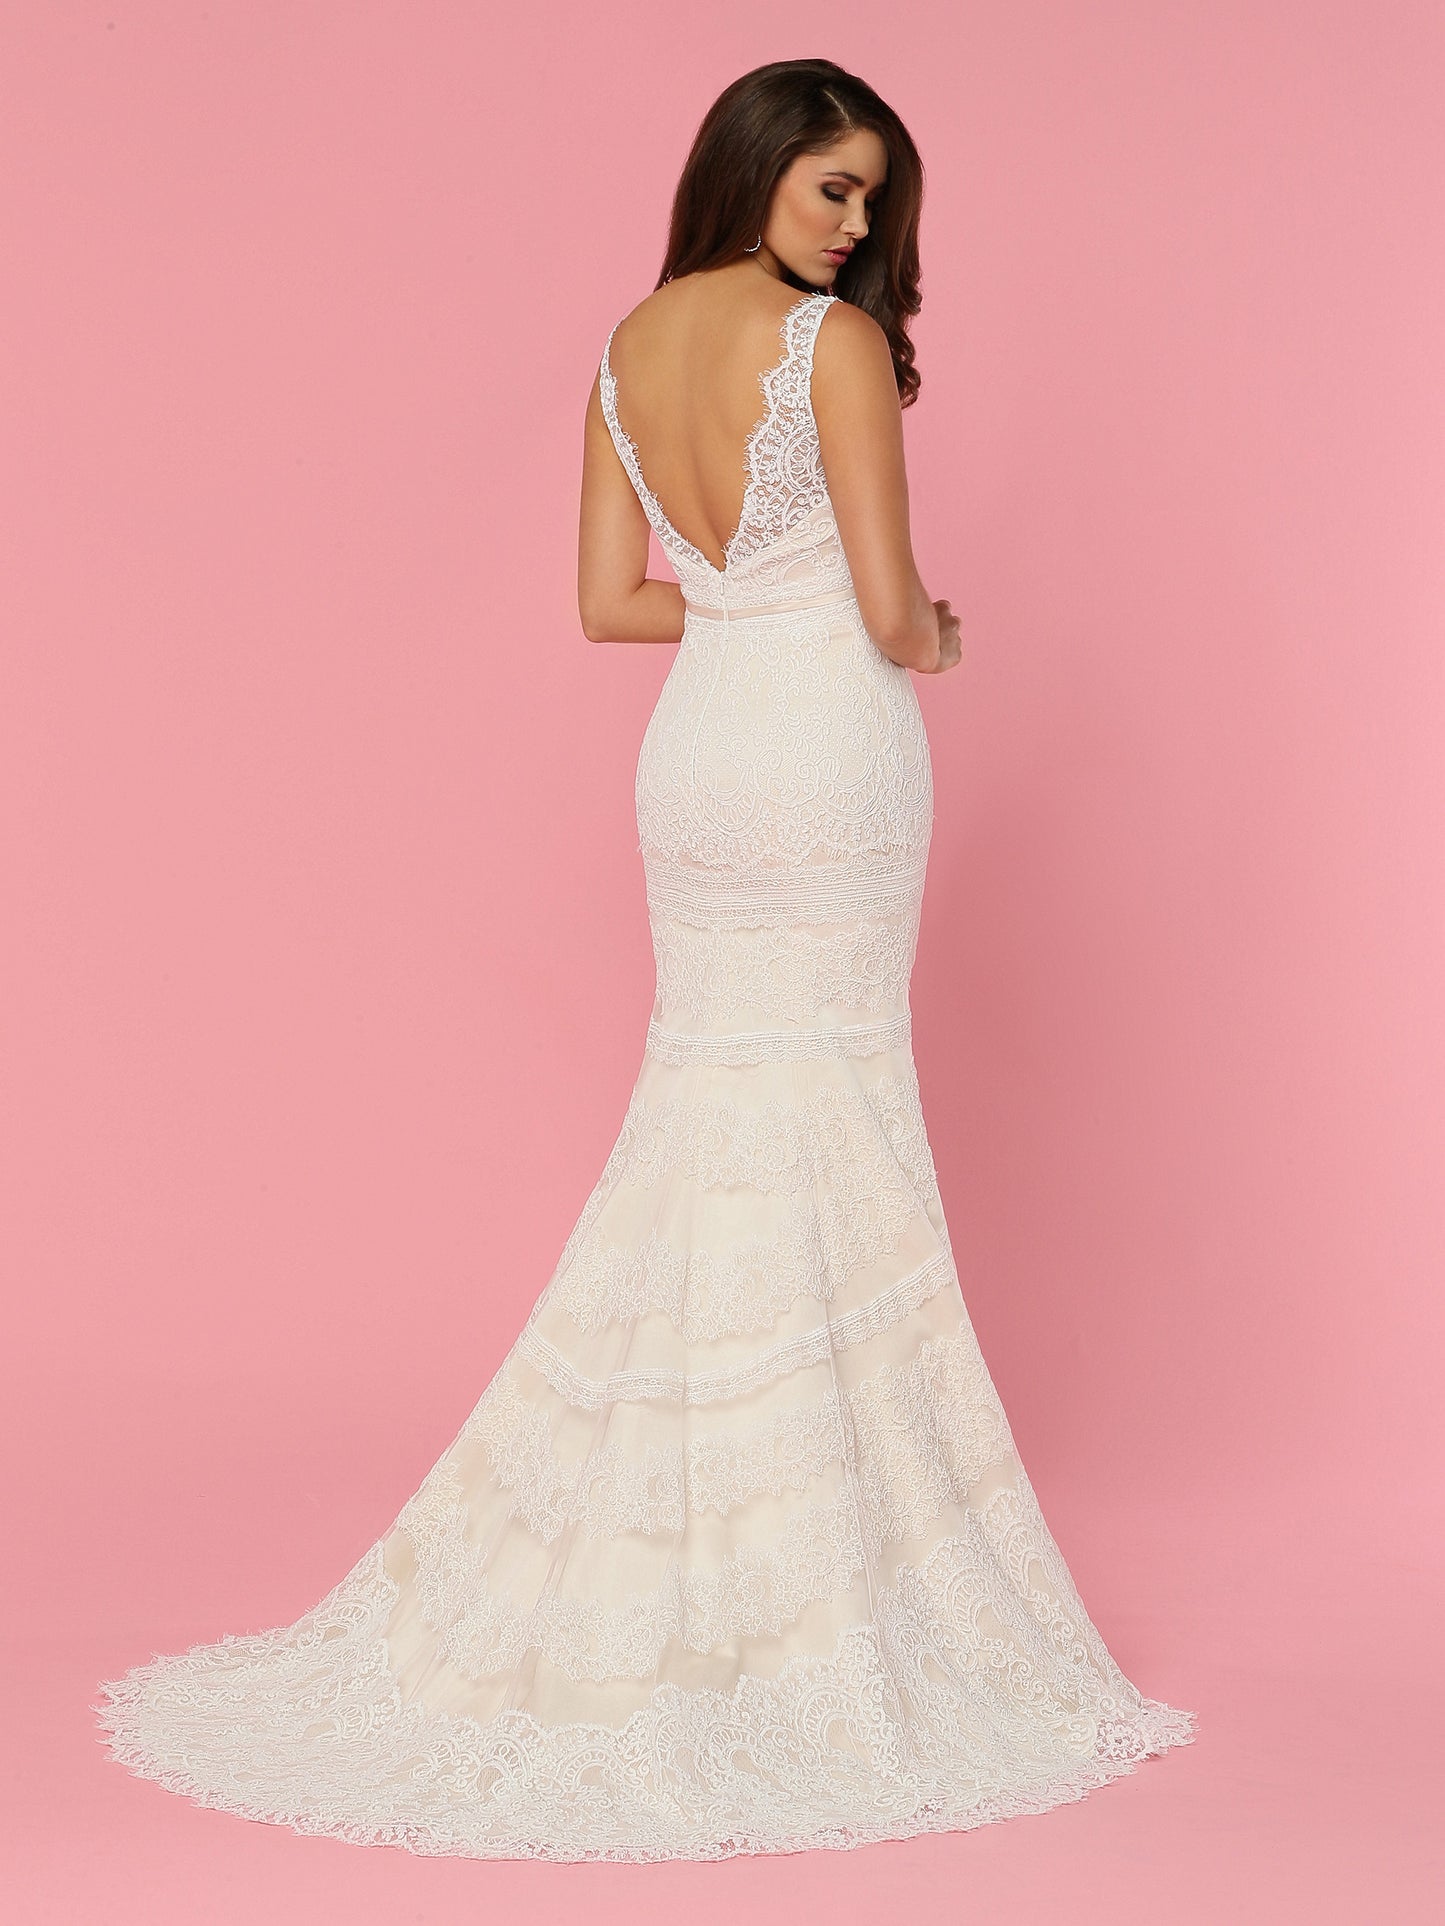 Davinci Bridal 50447 is a long fitted Mermaid Wedding dress. Featuring Allover lace with a sweetheart illusion V Neckline with sheer lace straps and a sheer Open V Back. attached Satin waist belt. Eyelash lace hem and train.  Available for 1-2 Week Delivery!!!  Available Sizes: 2,4,6,8,10,12,14,16,18,20  Available Colors: Ivory/Champagne, Ivory/Ivory